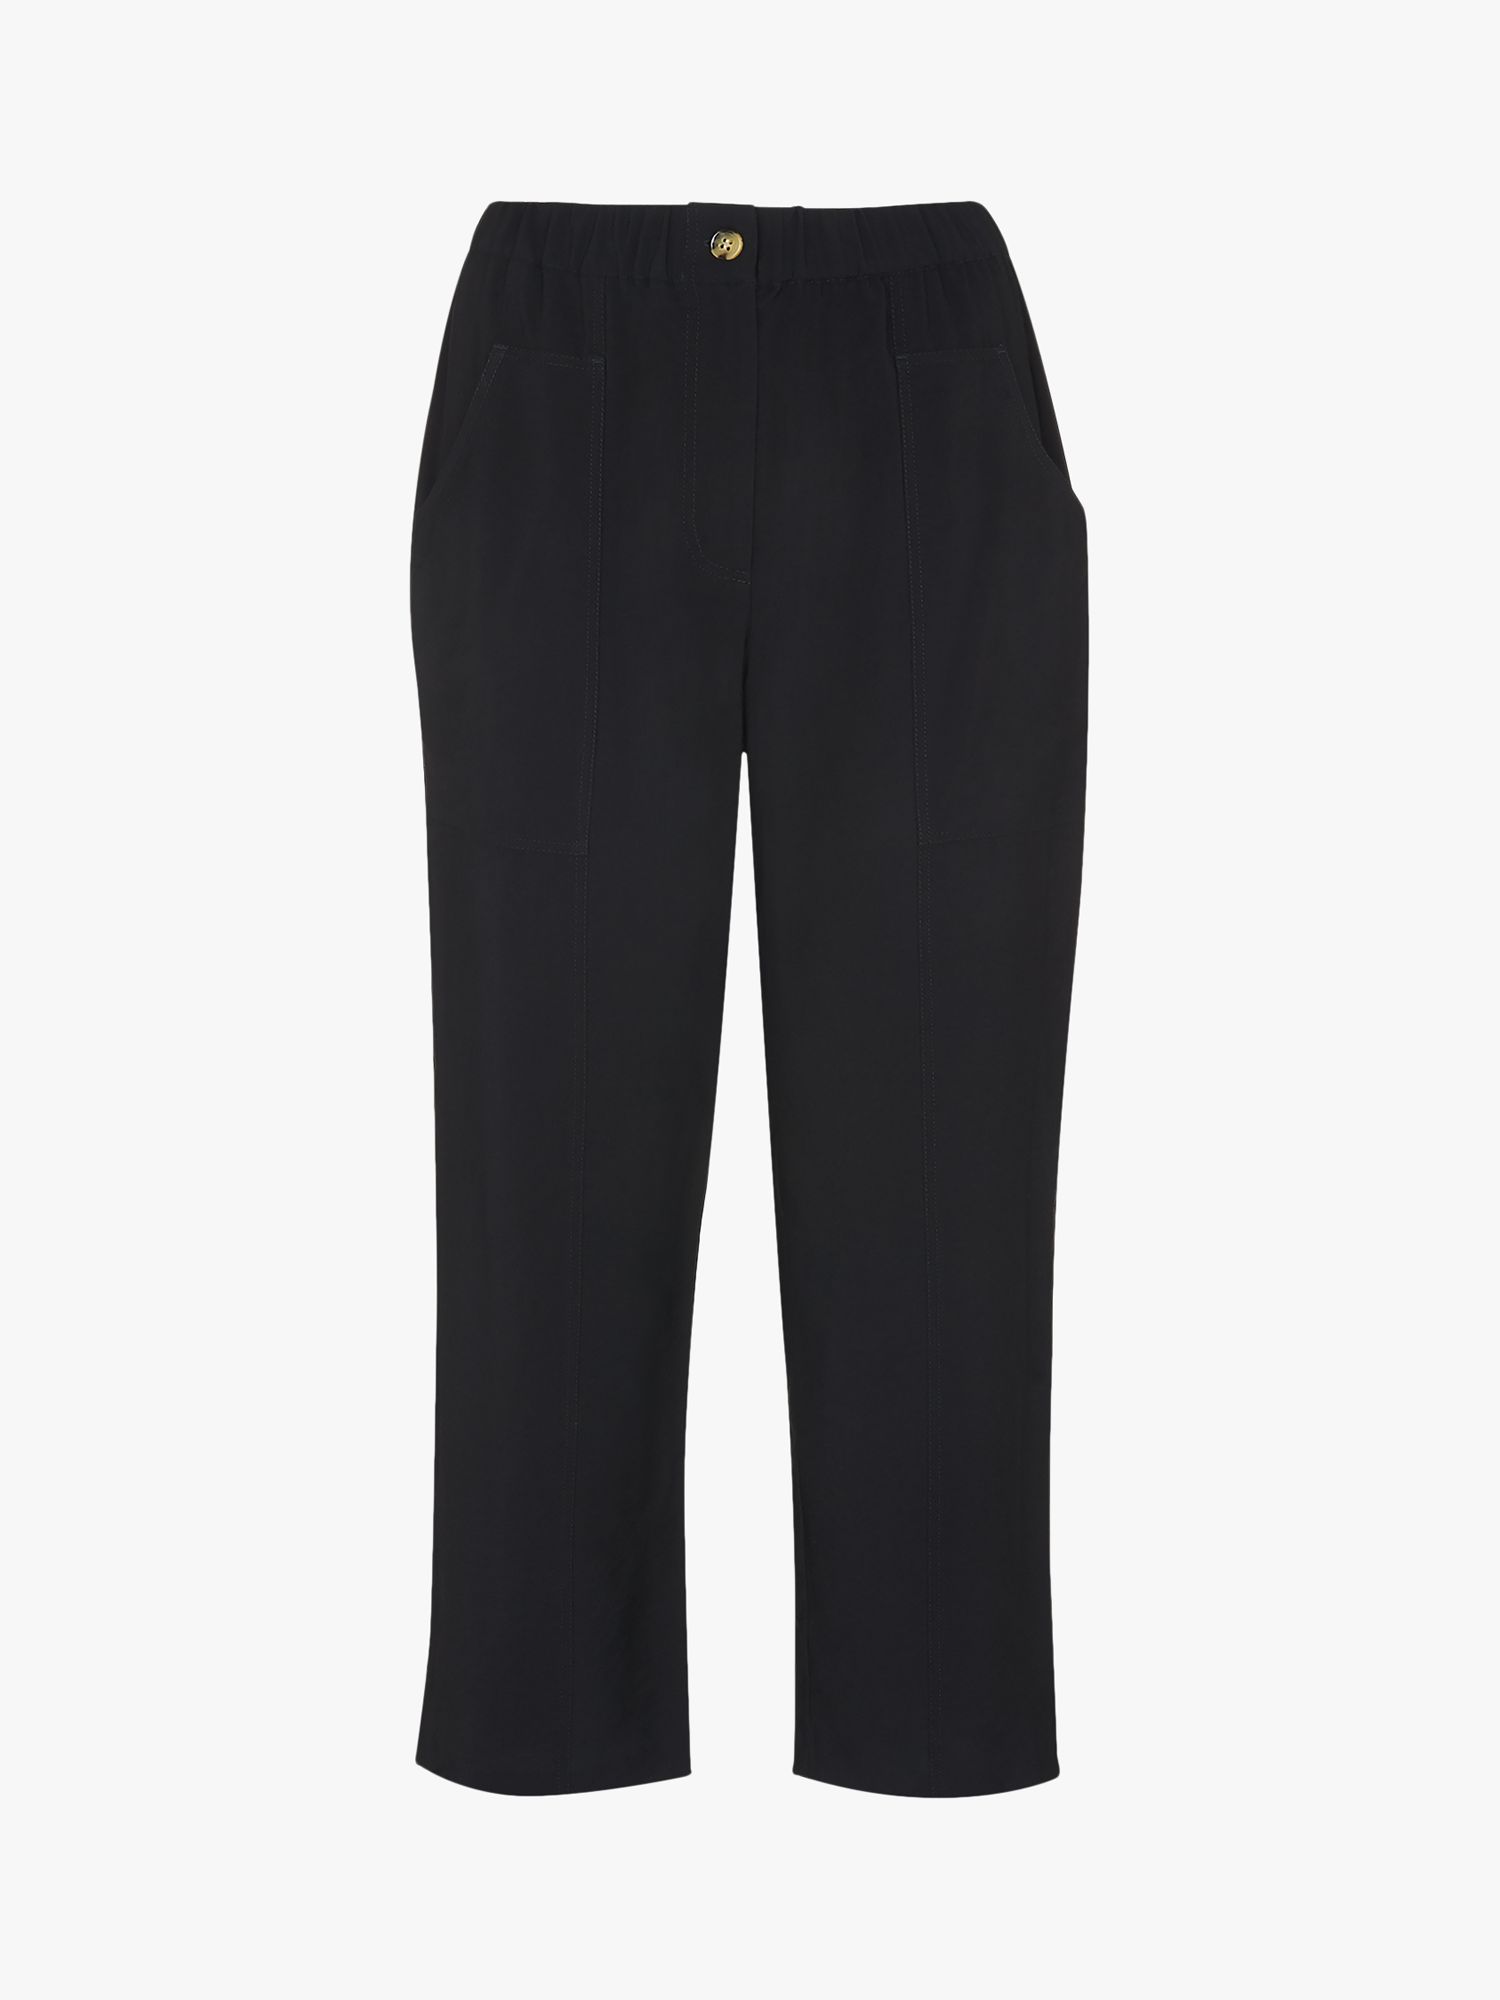 Whistles Easy Casual Trousers, Black at John Lewis & Partners